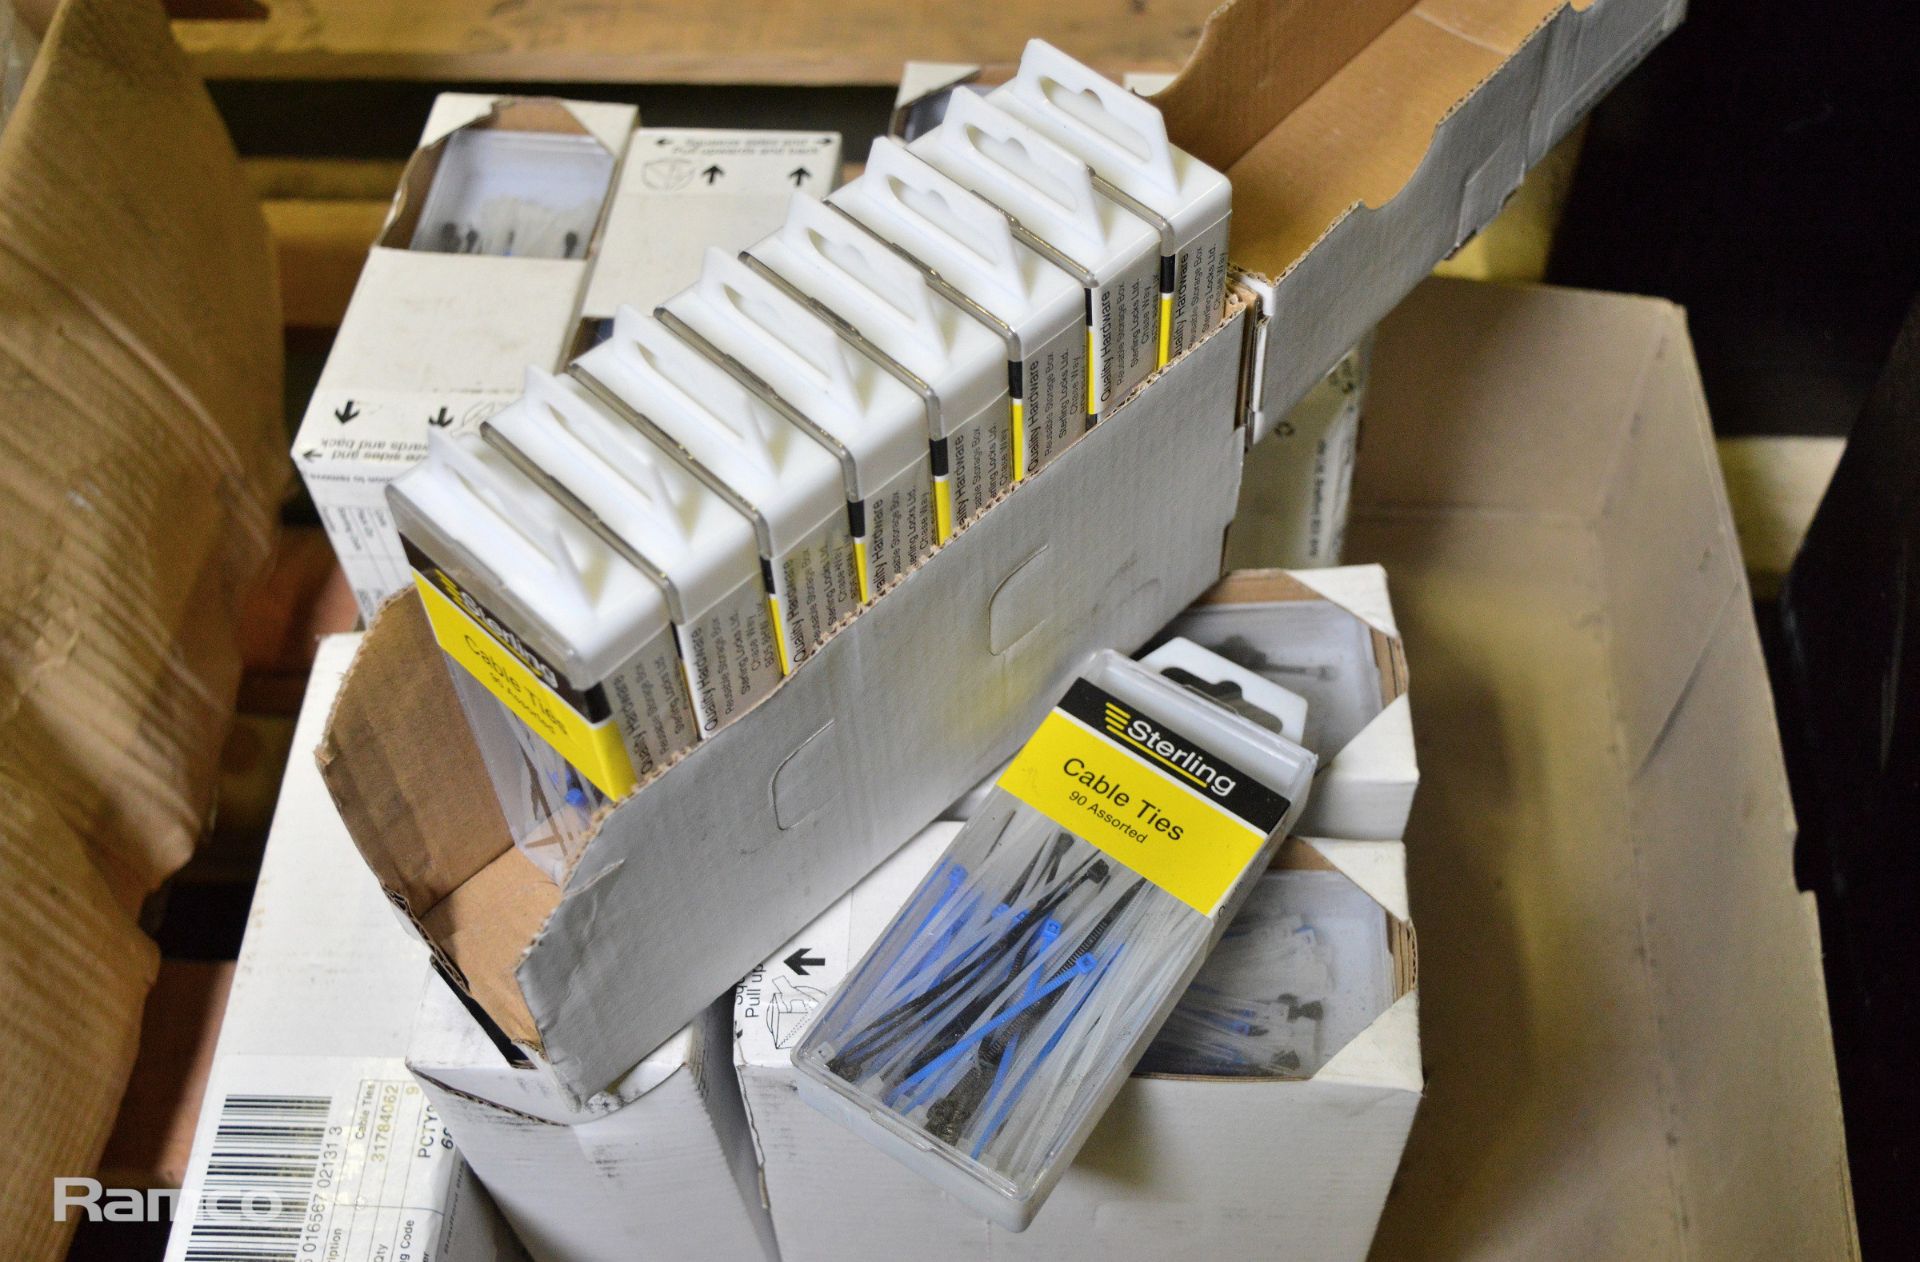 Small electrical wire cable ties - 90 per pack - 9 packs per box - 9 boxes - Image 2 of 2